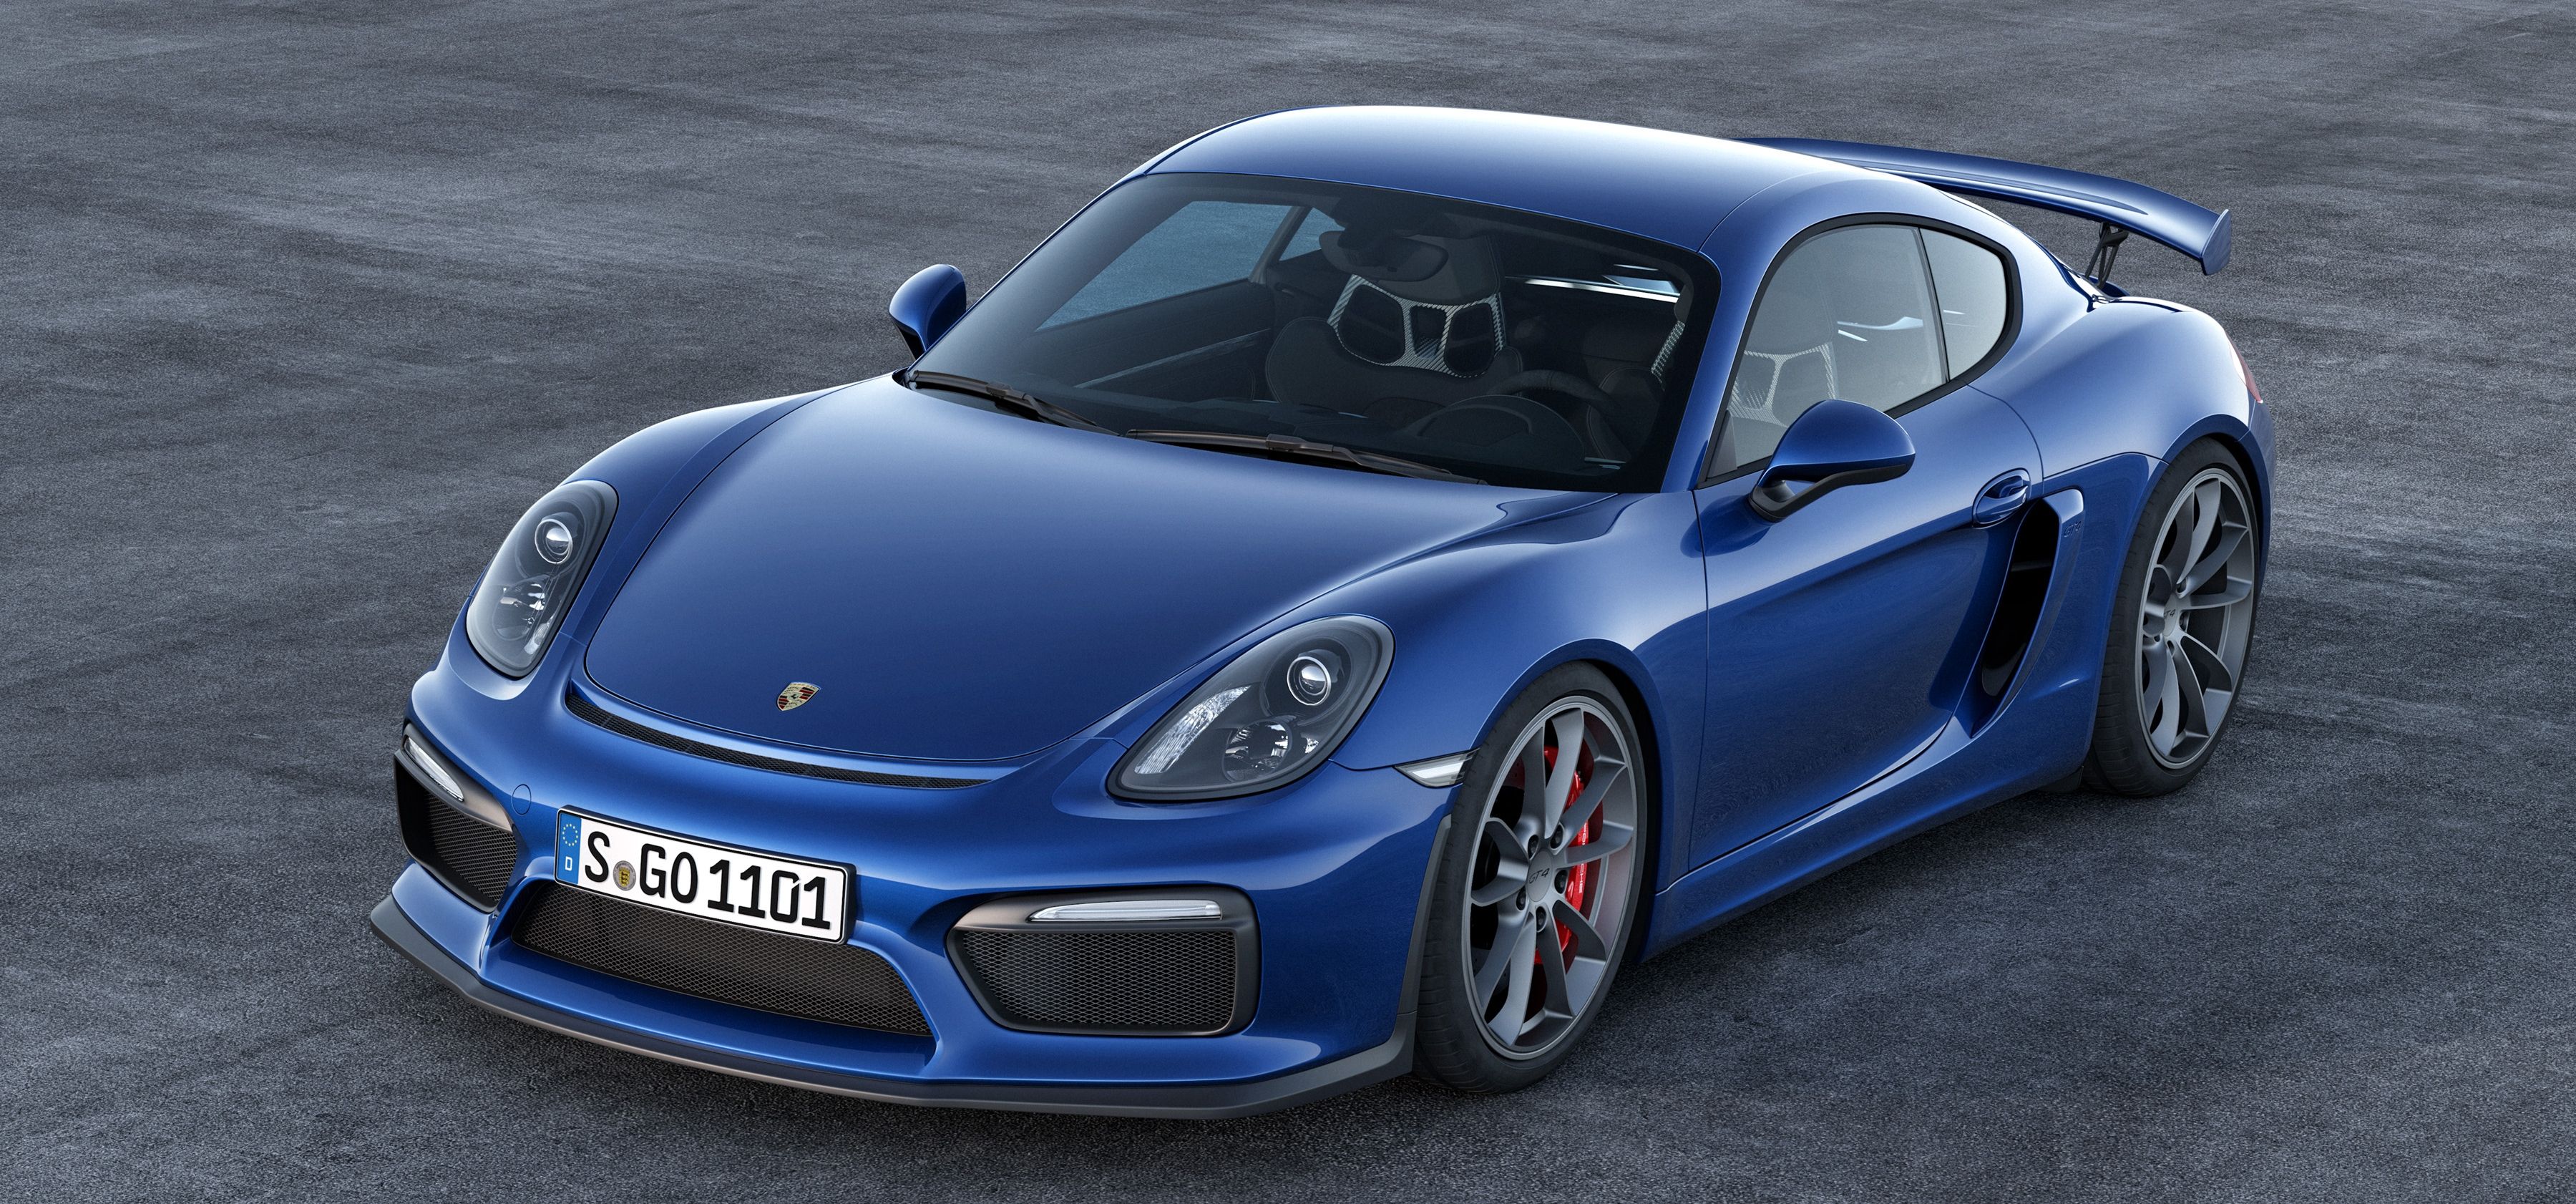  Porsche has oficially unveiled the 385-horsepower Cayman GT4, see it at TopSpeed.com.